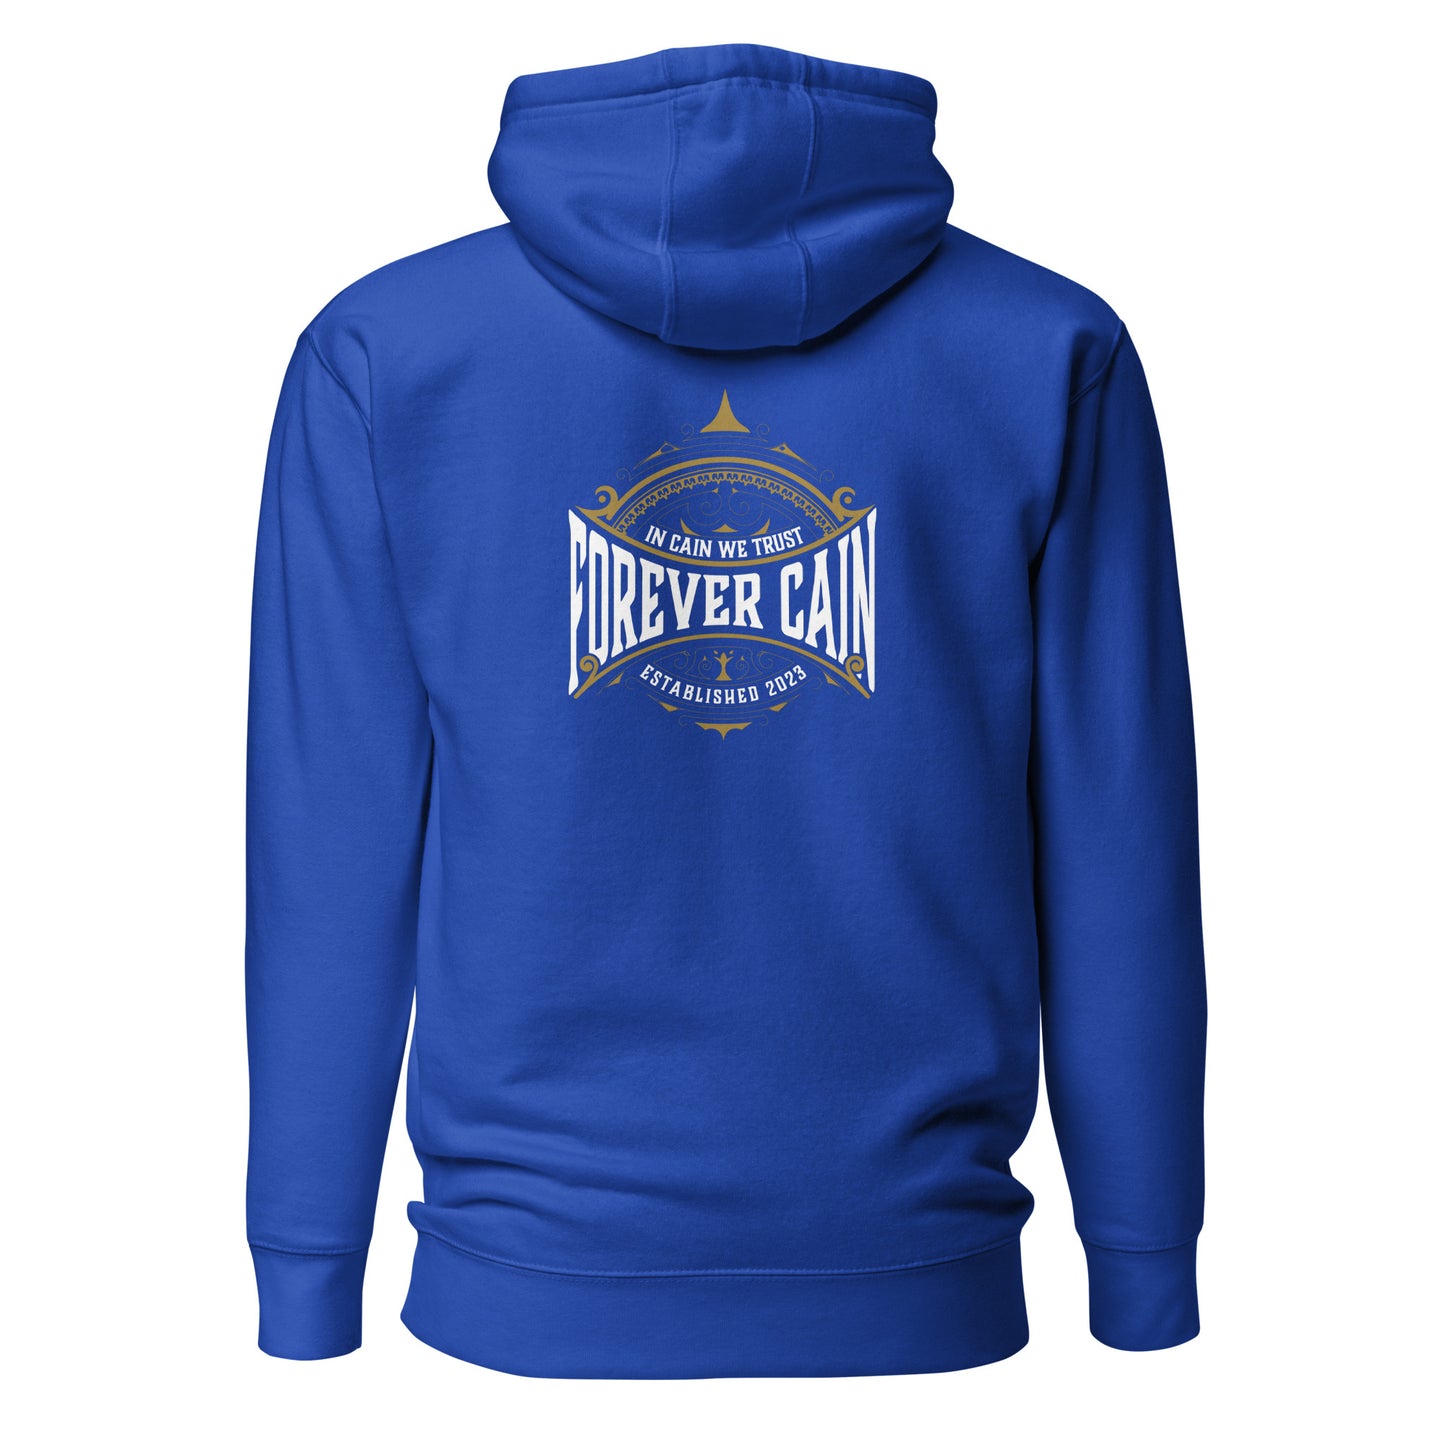 Royal Blue , Purple Unisex Hoodie - I Cant Make This Up